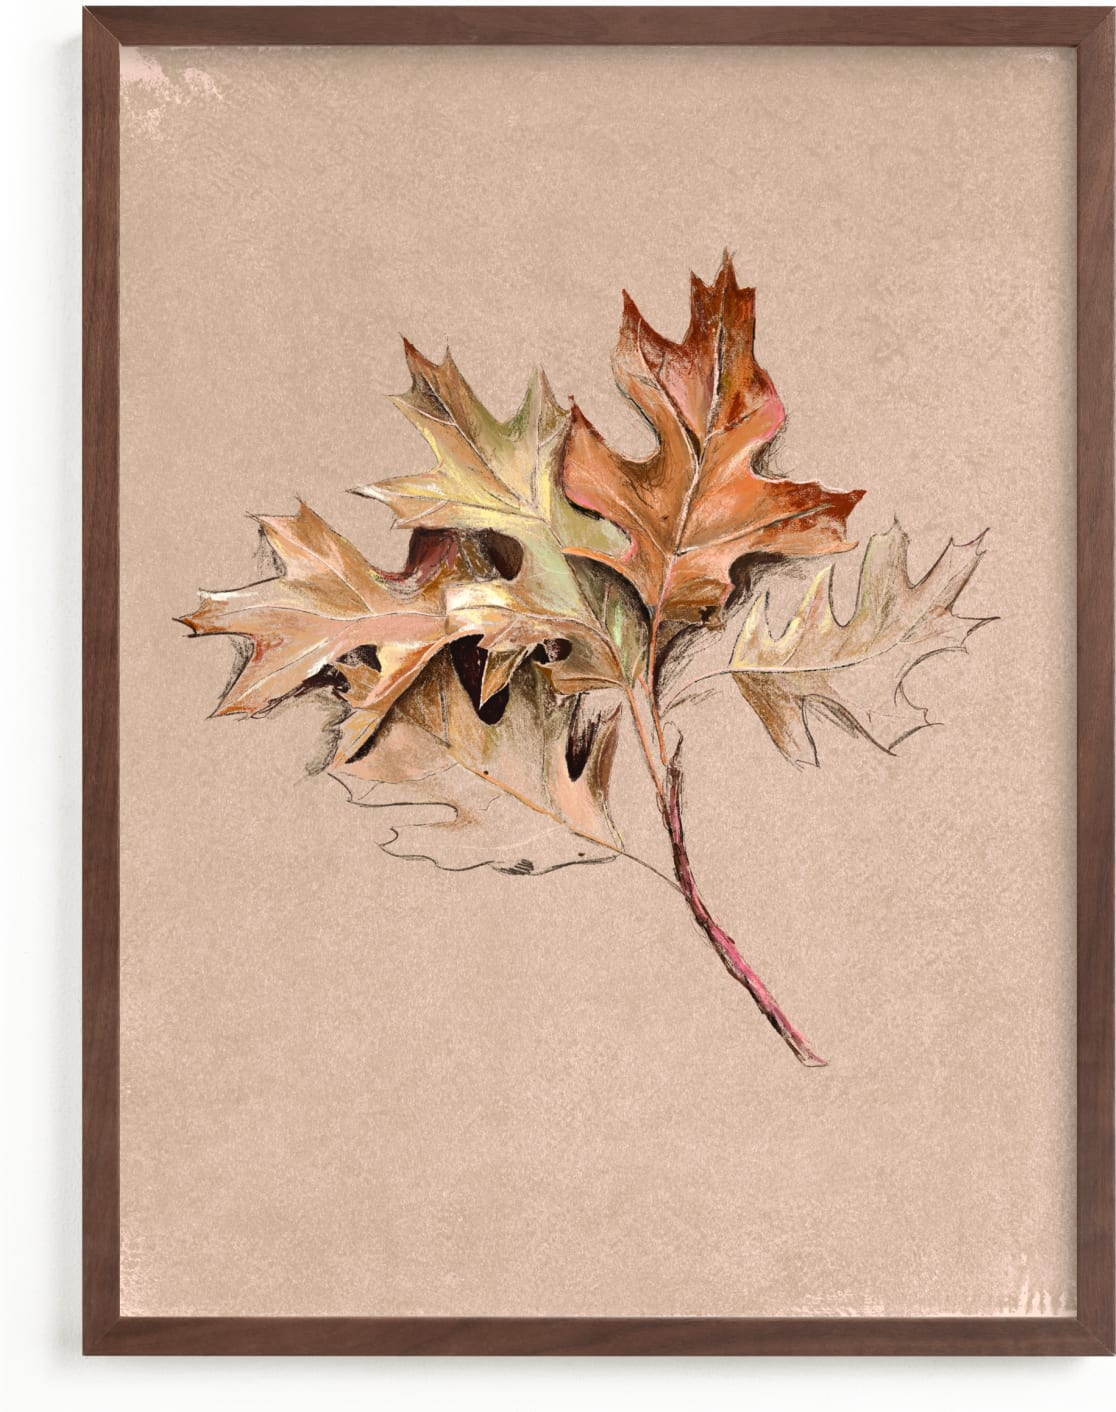 This is a brown, colorful, beige art by Olivia Kanaley Inman called Leaf Study.